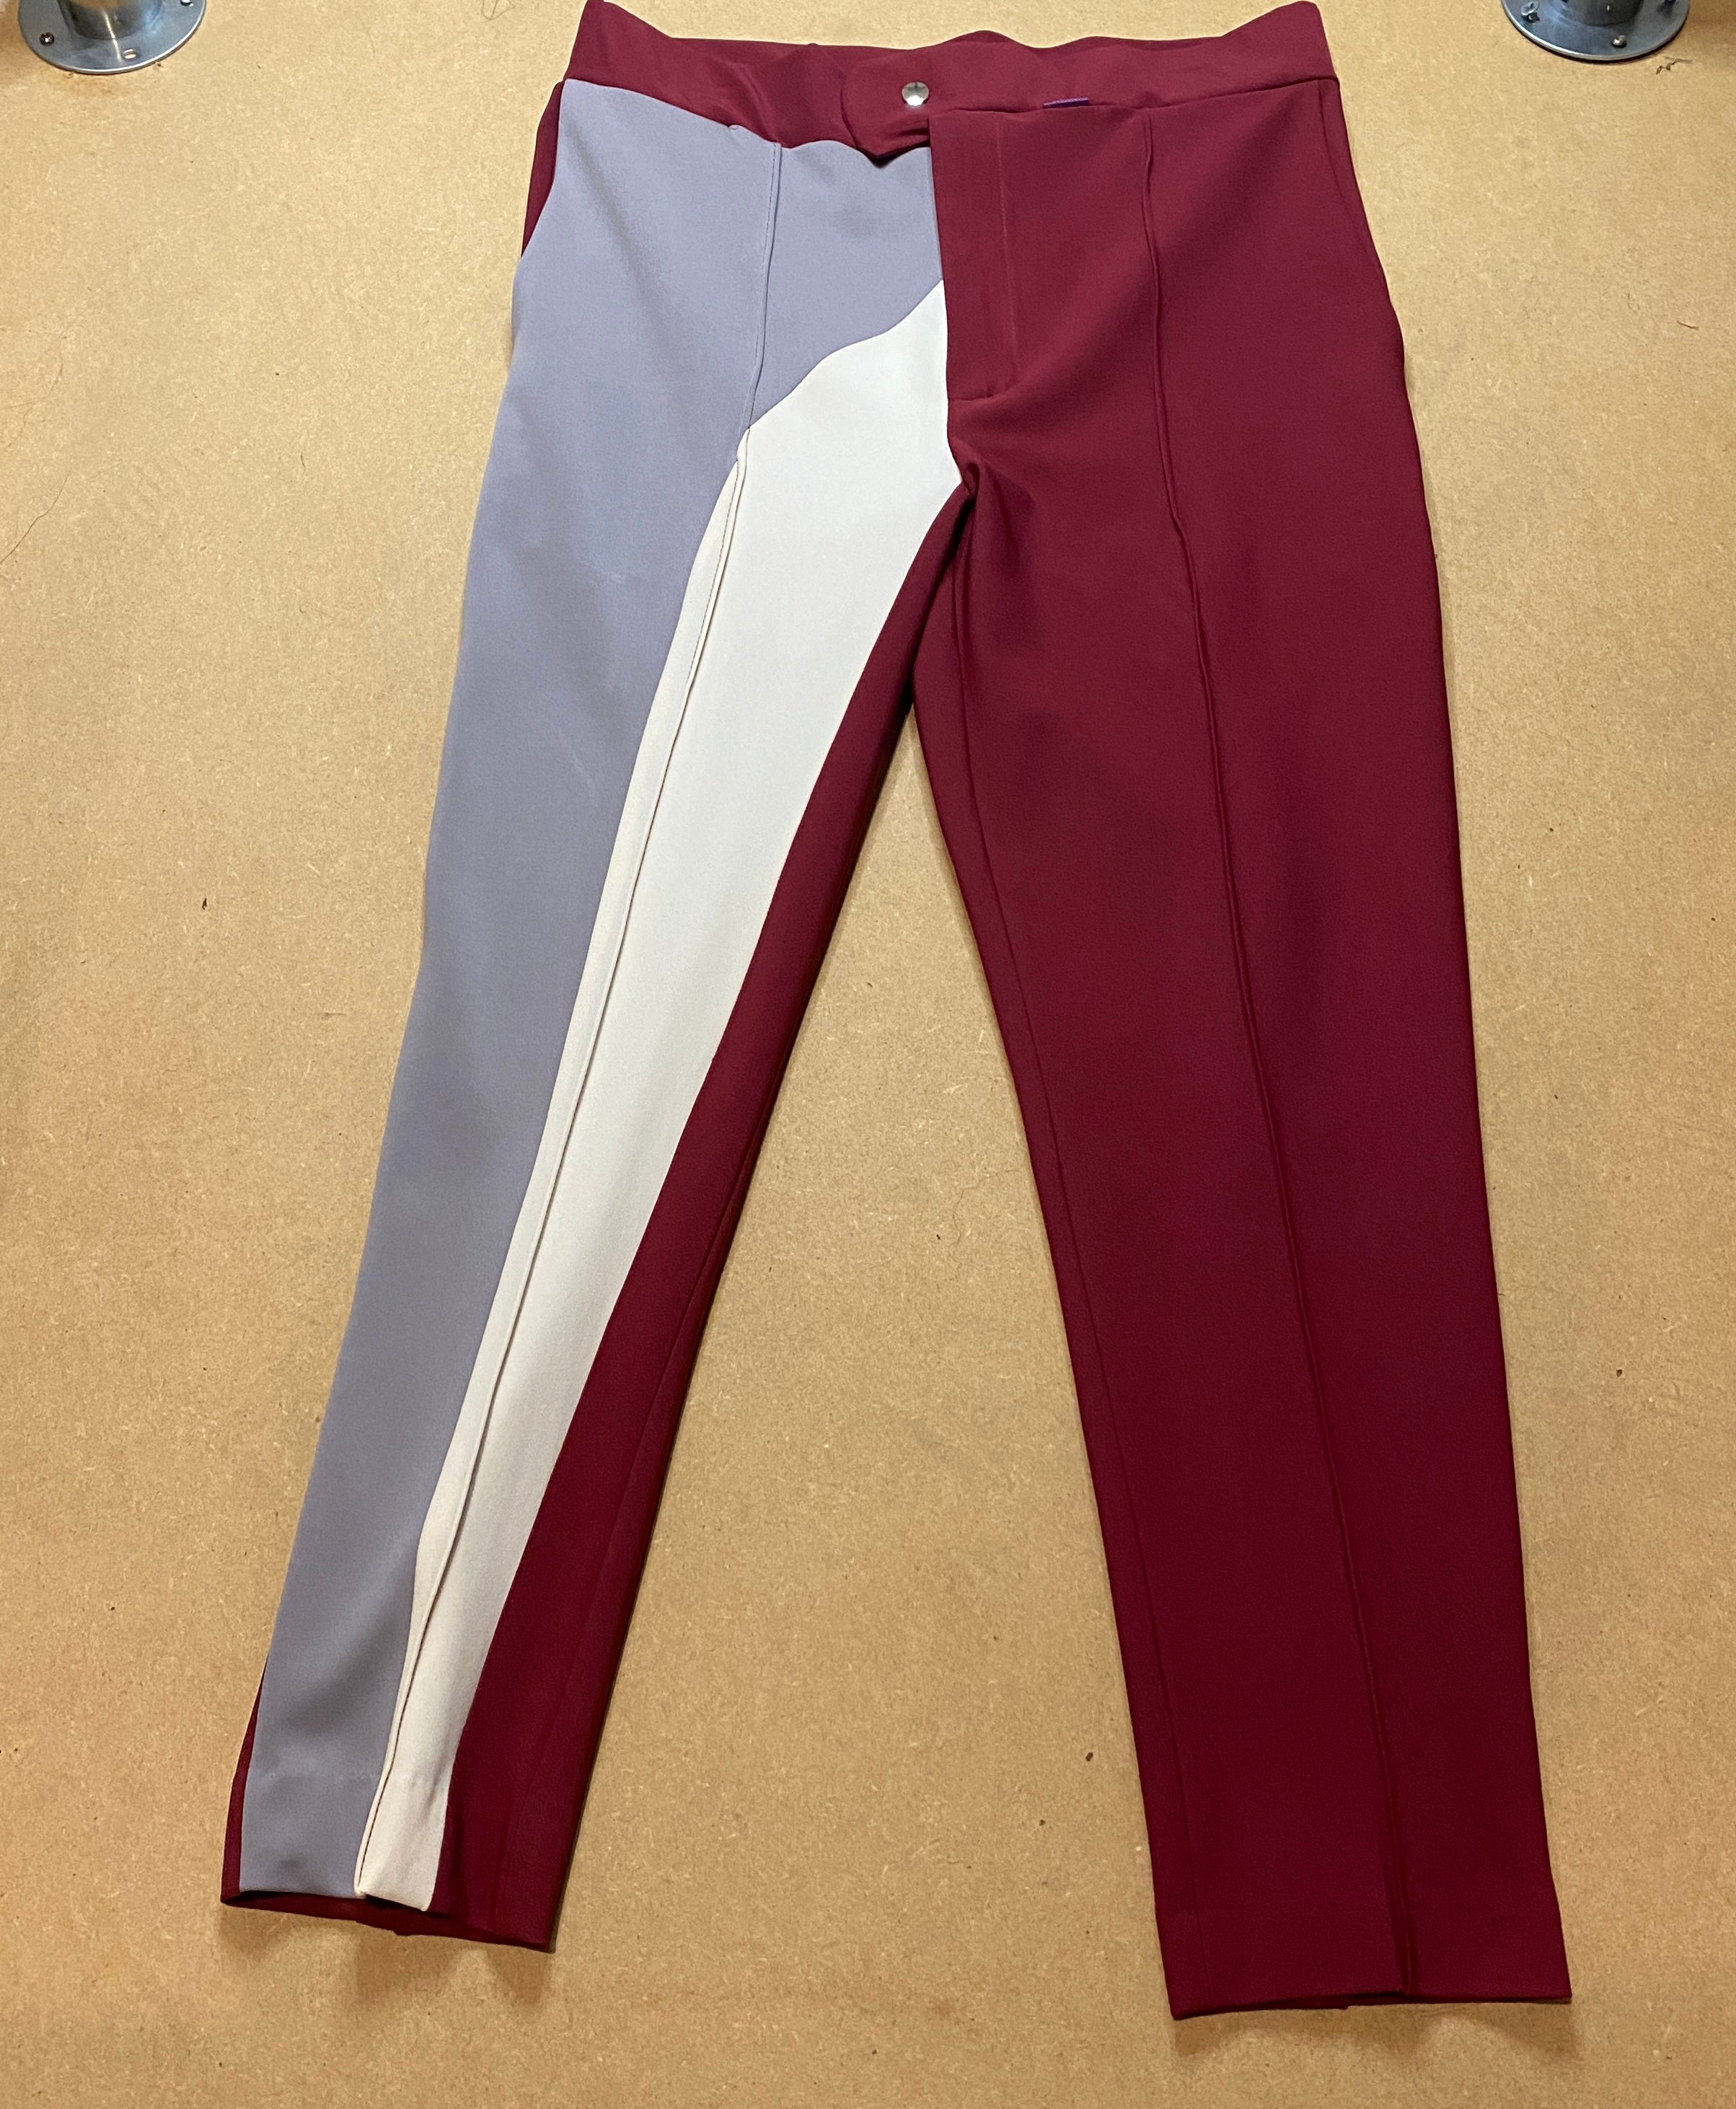 Rosewood Trousers